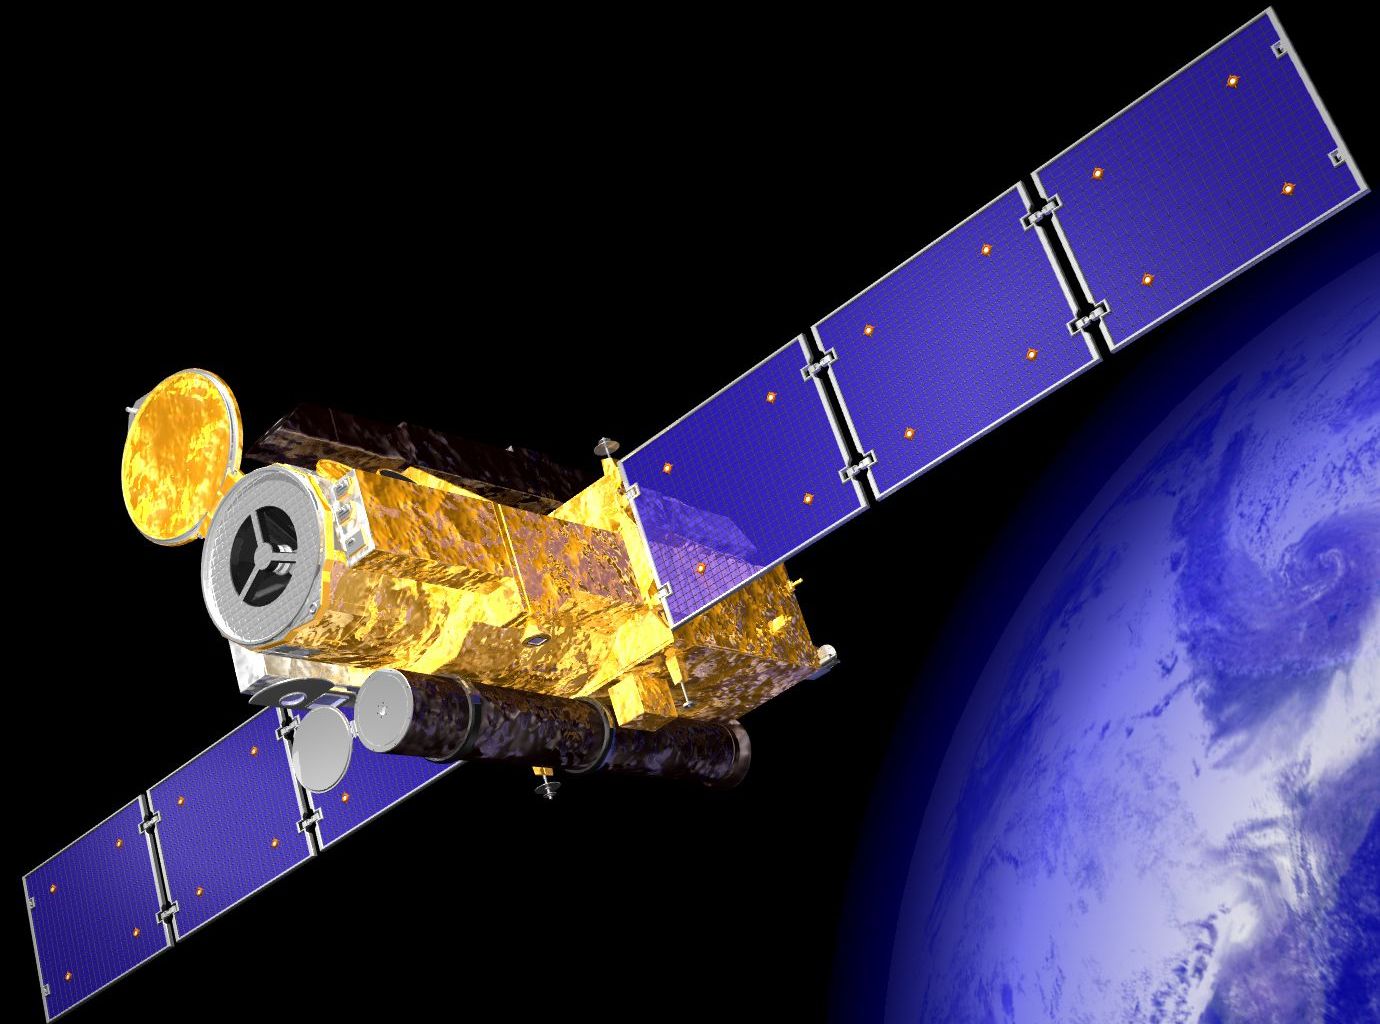 The Japanese Hinode space probe to explore the Sun was launched in 2006 and continues to send data to Earth from orbit around the Sun. The mission observes those regions on the Sun that produce solar flares and solar winds. Louise Harra was and is instrumental in the mission.